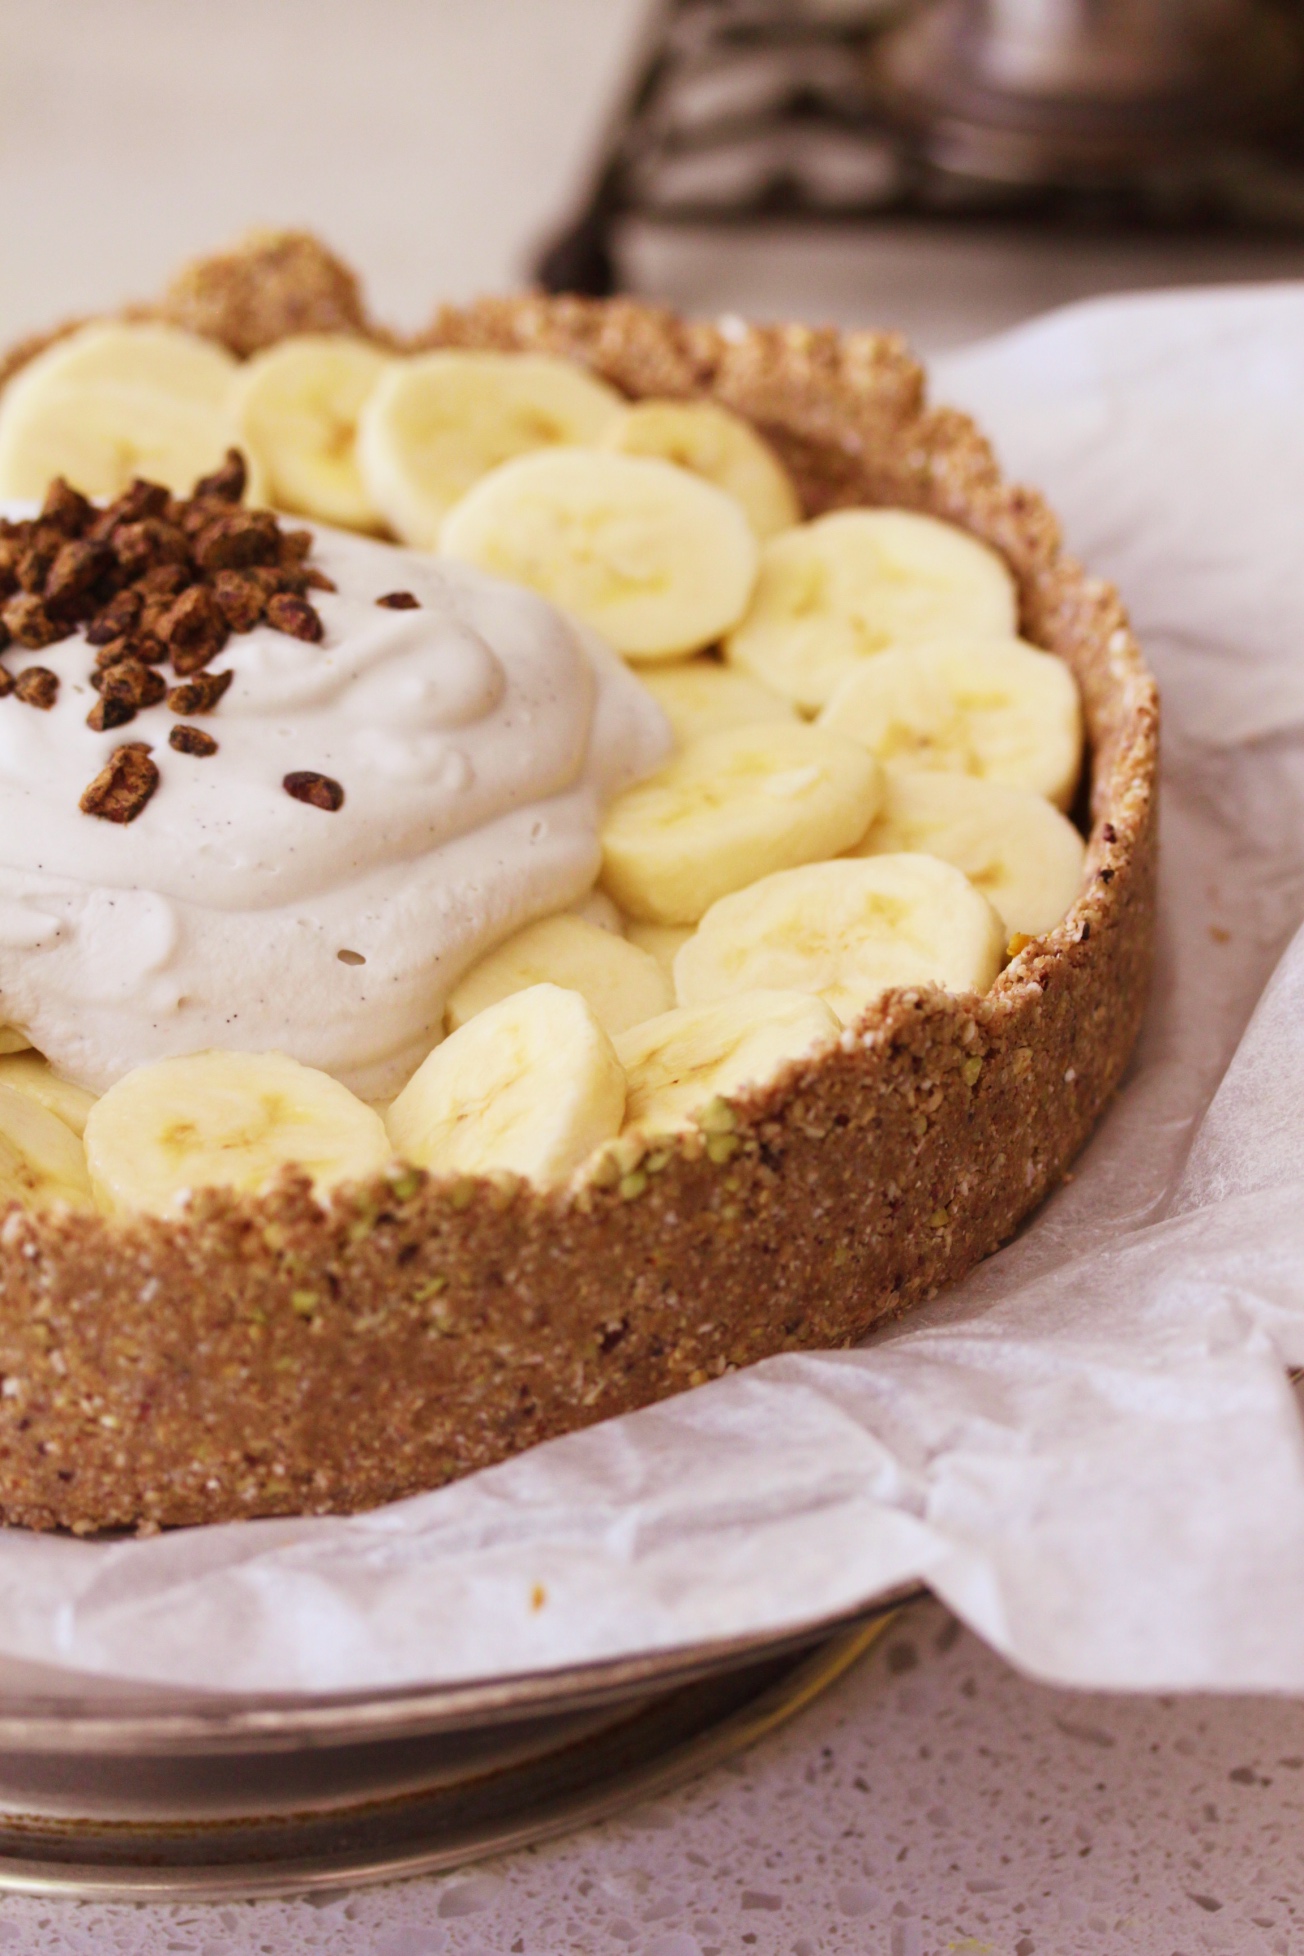 Calories in Tesco Banoffee Cheesecake 600g, Nutrition Information |  Nutracheck